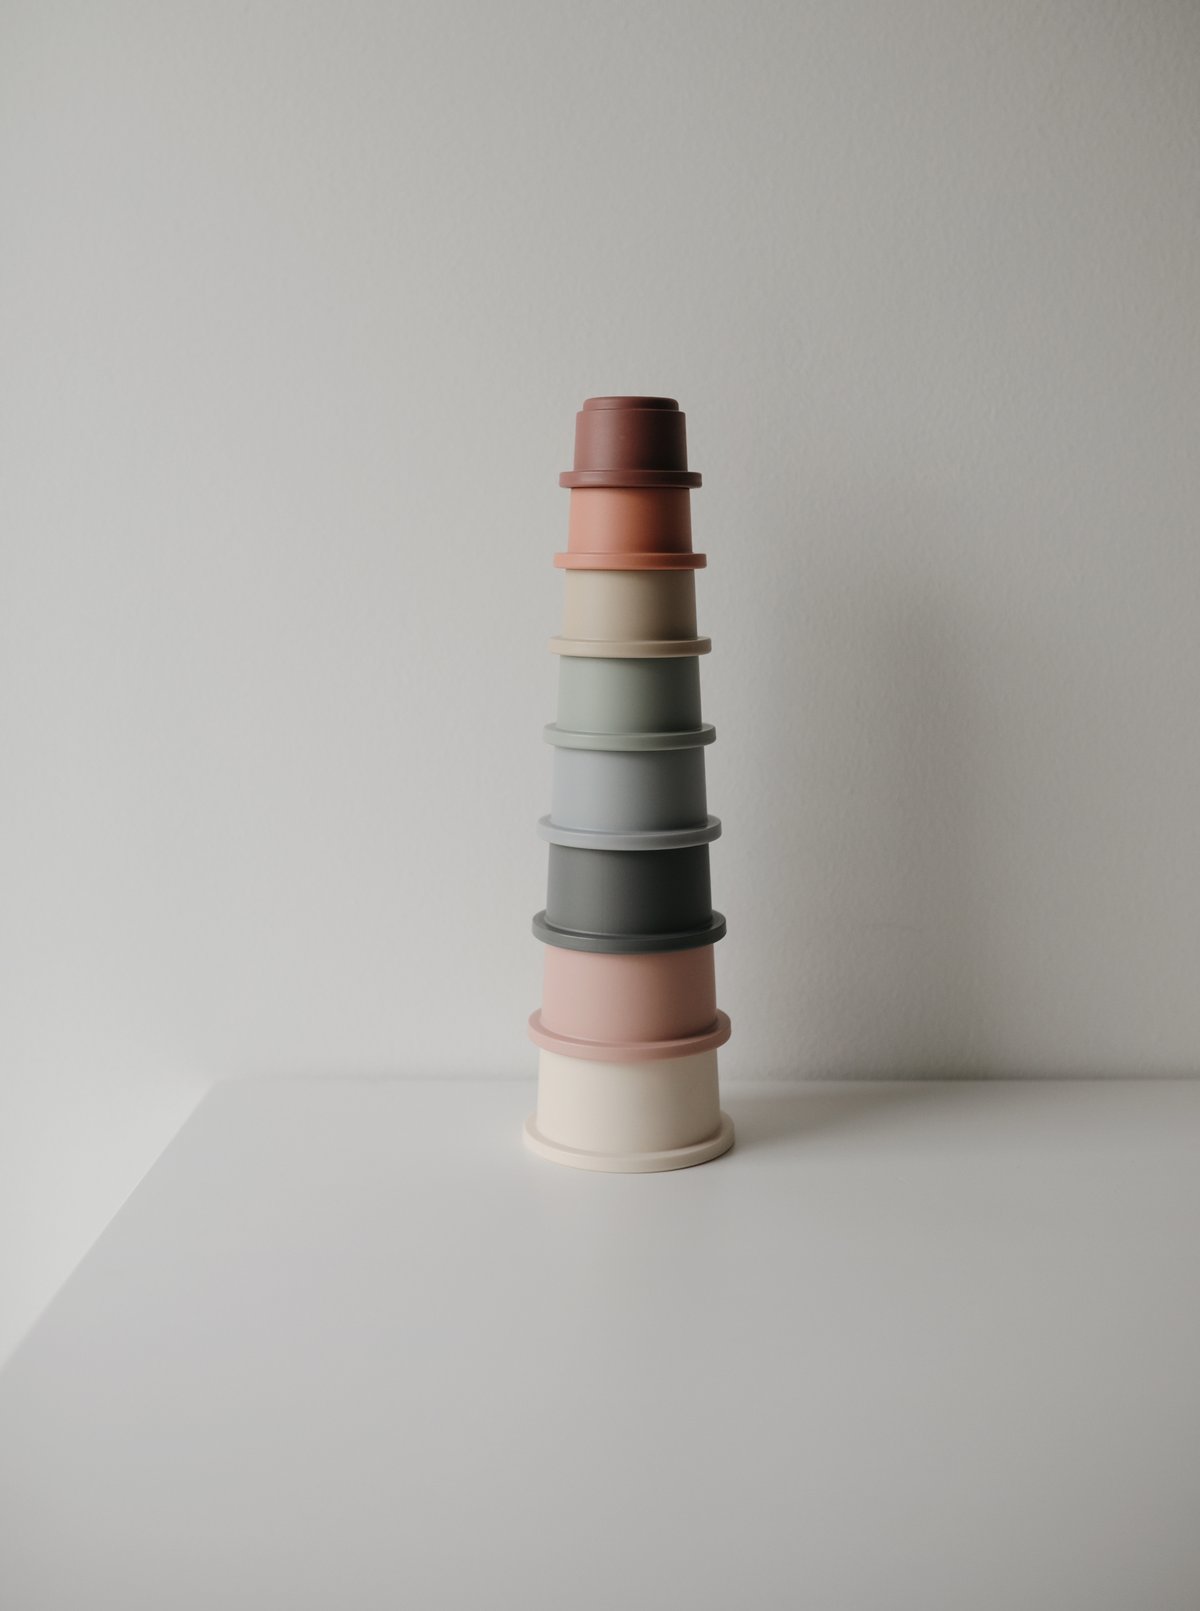 Stacking Cups Toy (original)